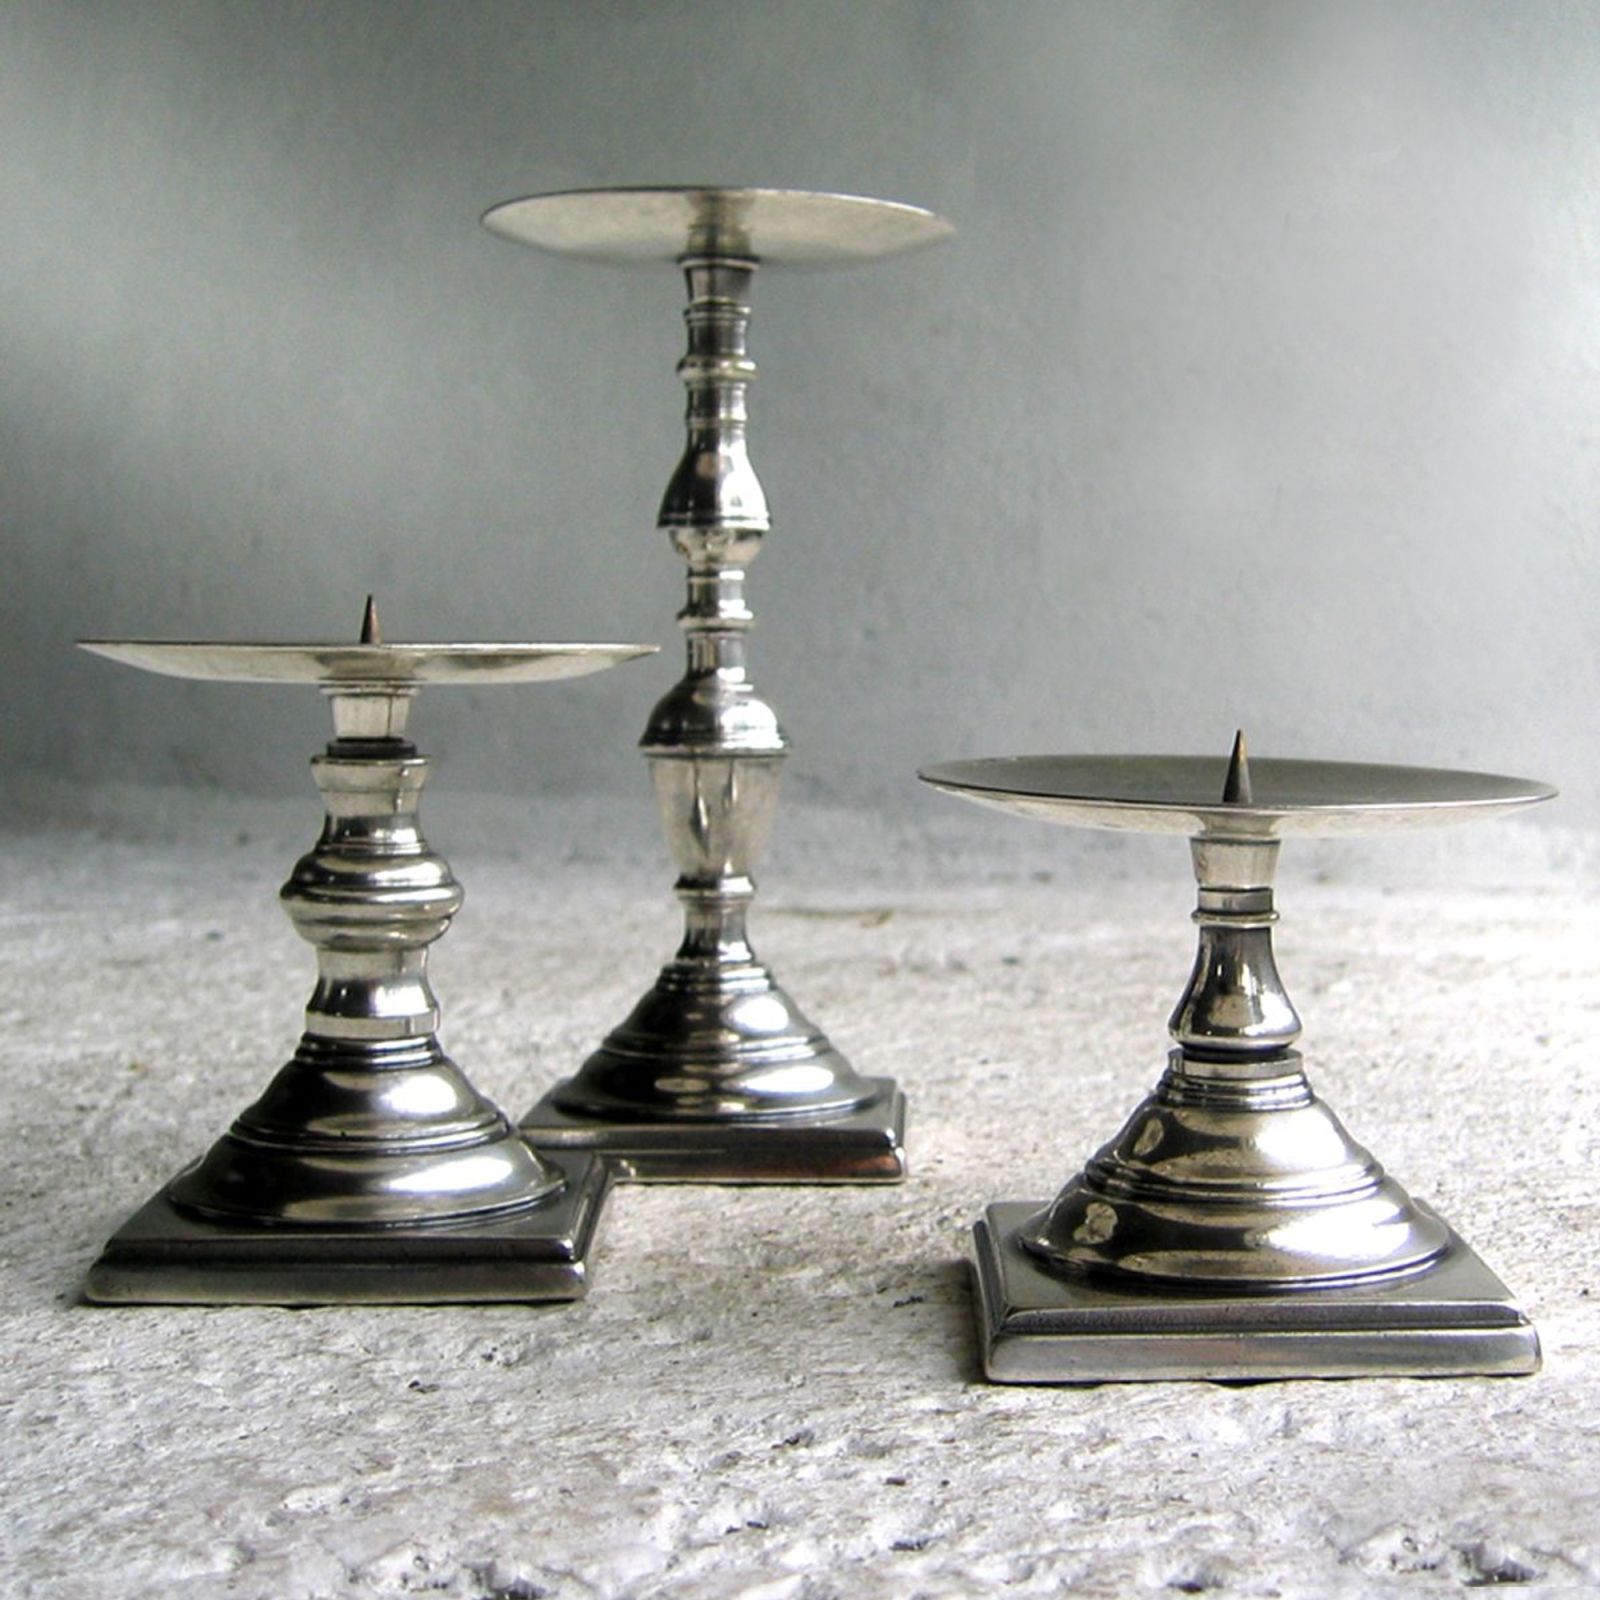 Solid brass silver plated candlesticks - choice of 3 sizes